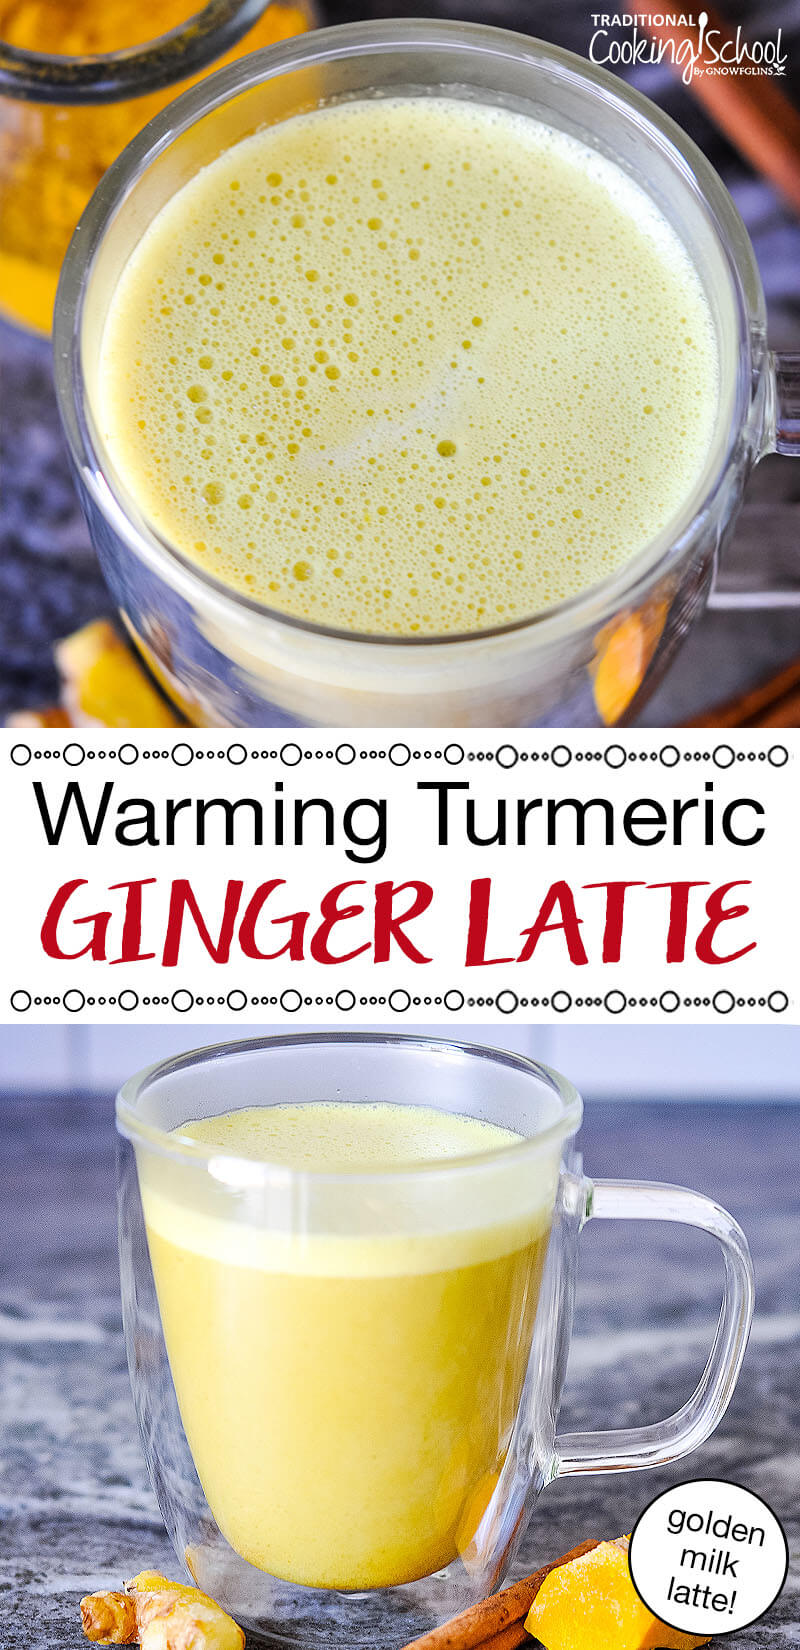 photo collage of a golden, foamy drink in a clear glass mug with text overlay: "Warming Turmeric Ginger Latte (golden milk latte!)"